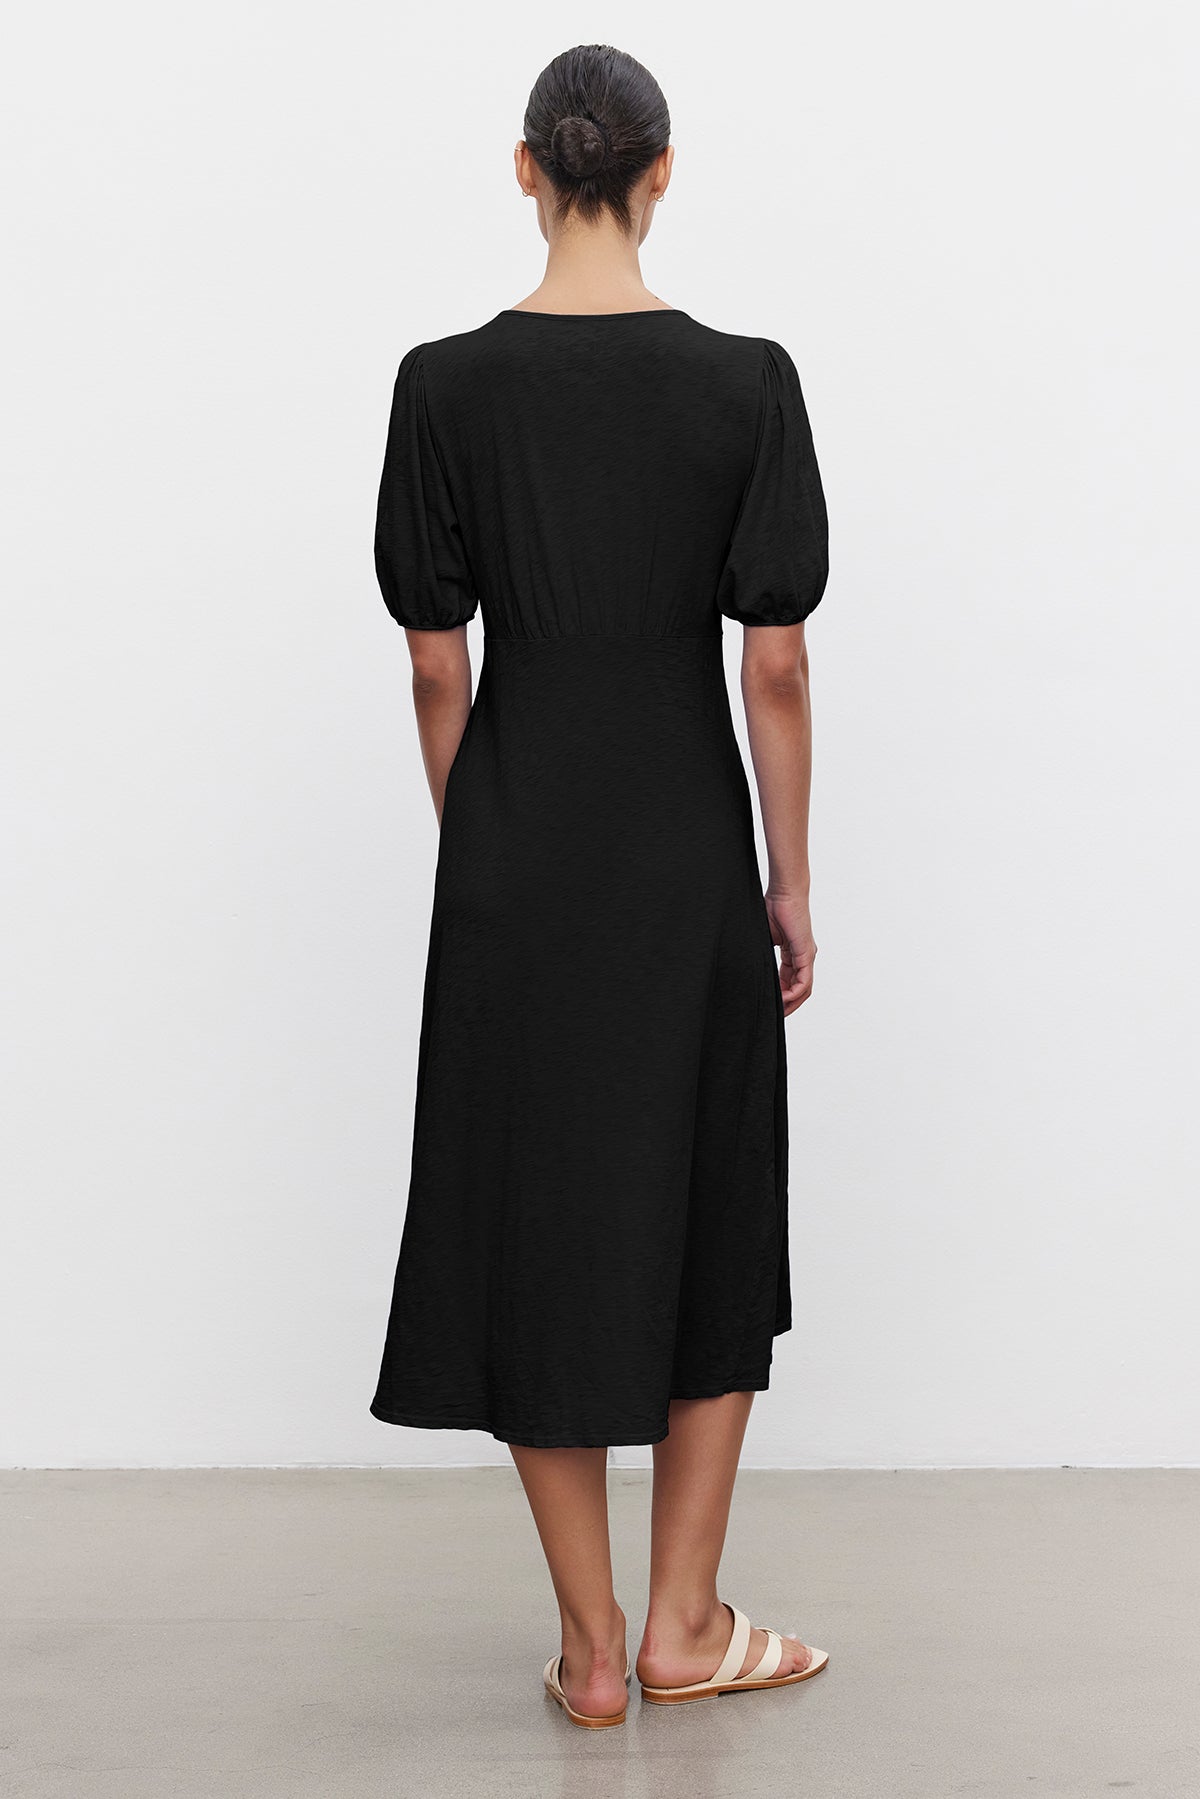   A person with hair tied up wears a Velvet by Graham & Spencer PARKER COTTON SLUB MIDI DRESS with short sleeves and sandals, standing against a plain white background. 